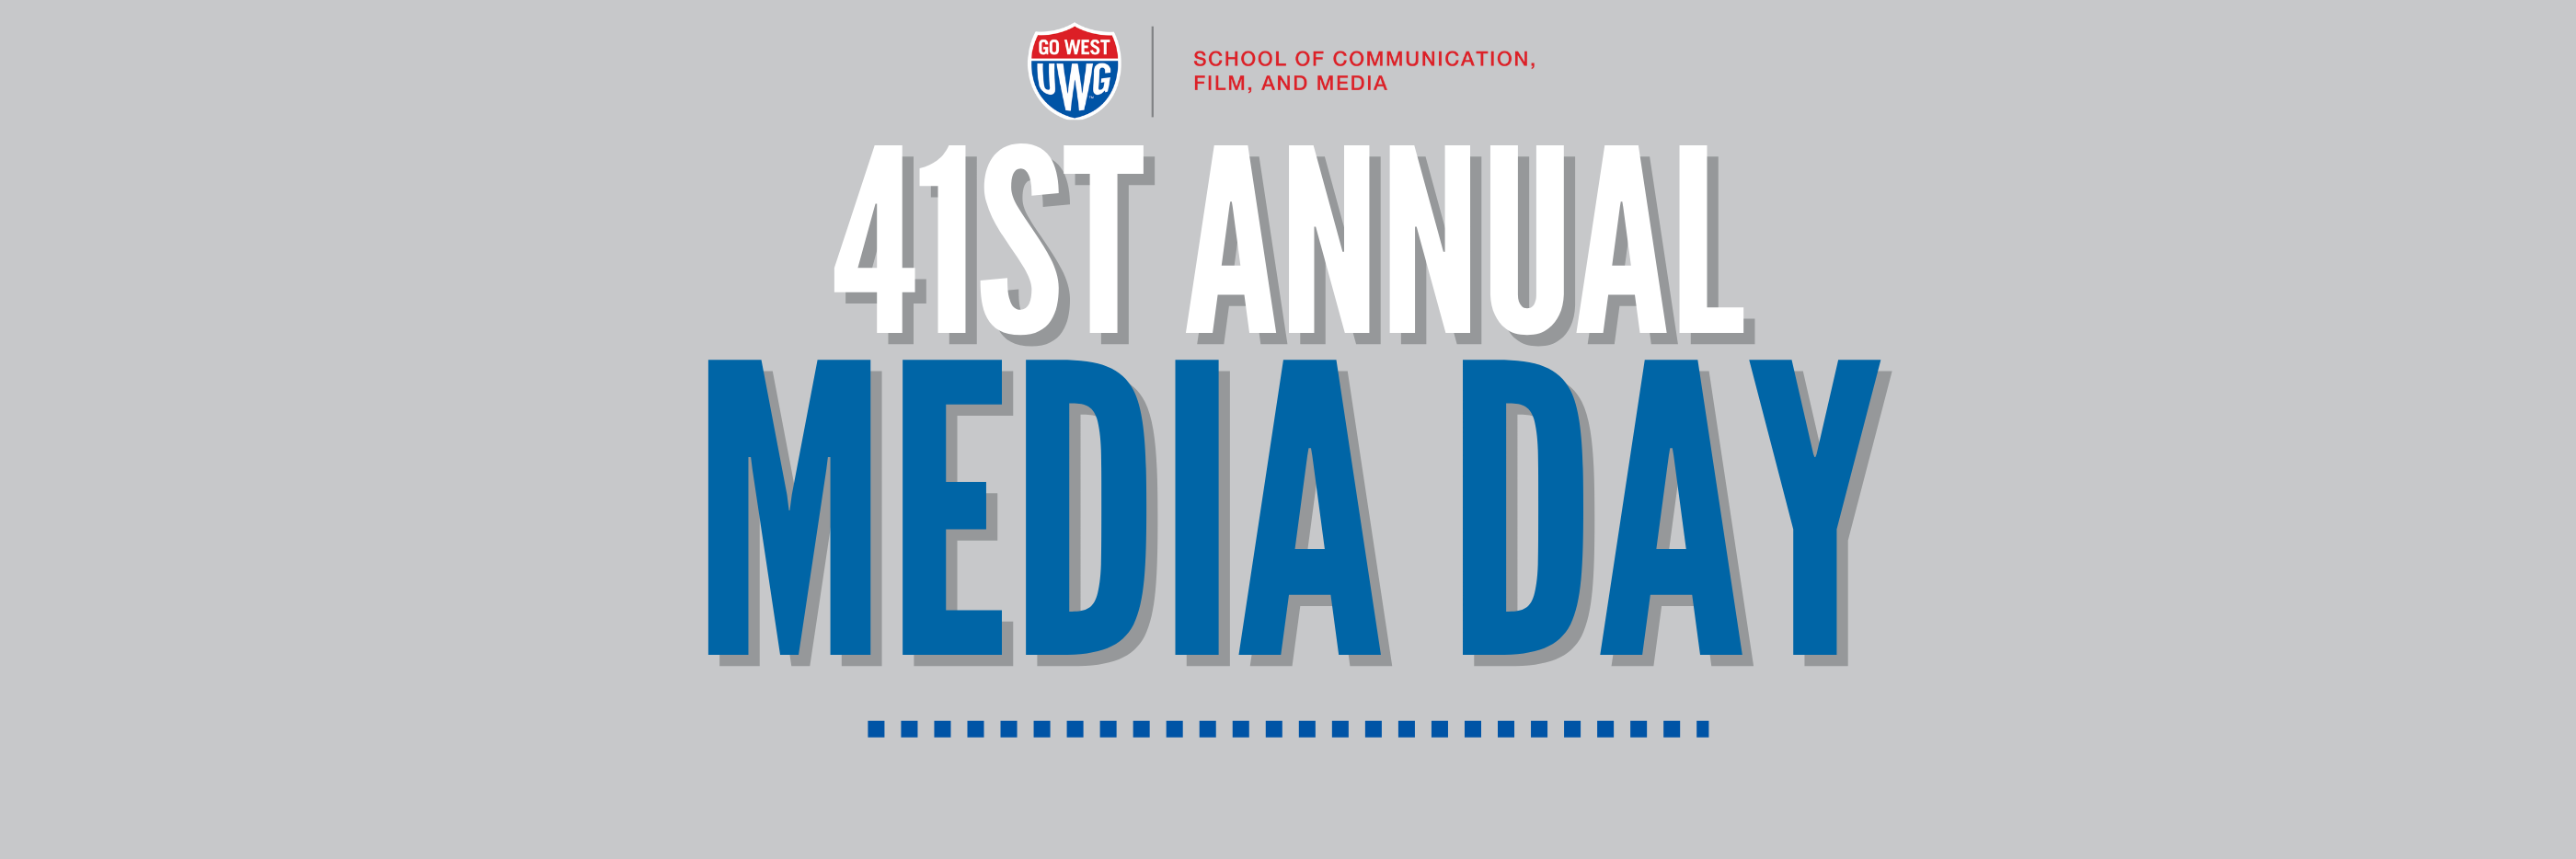 41st Annual Media Day